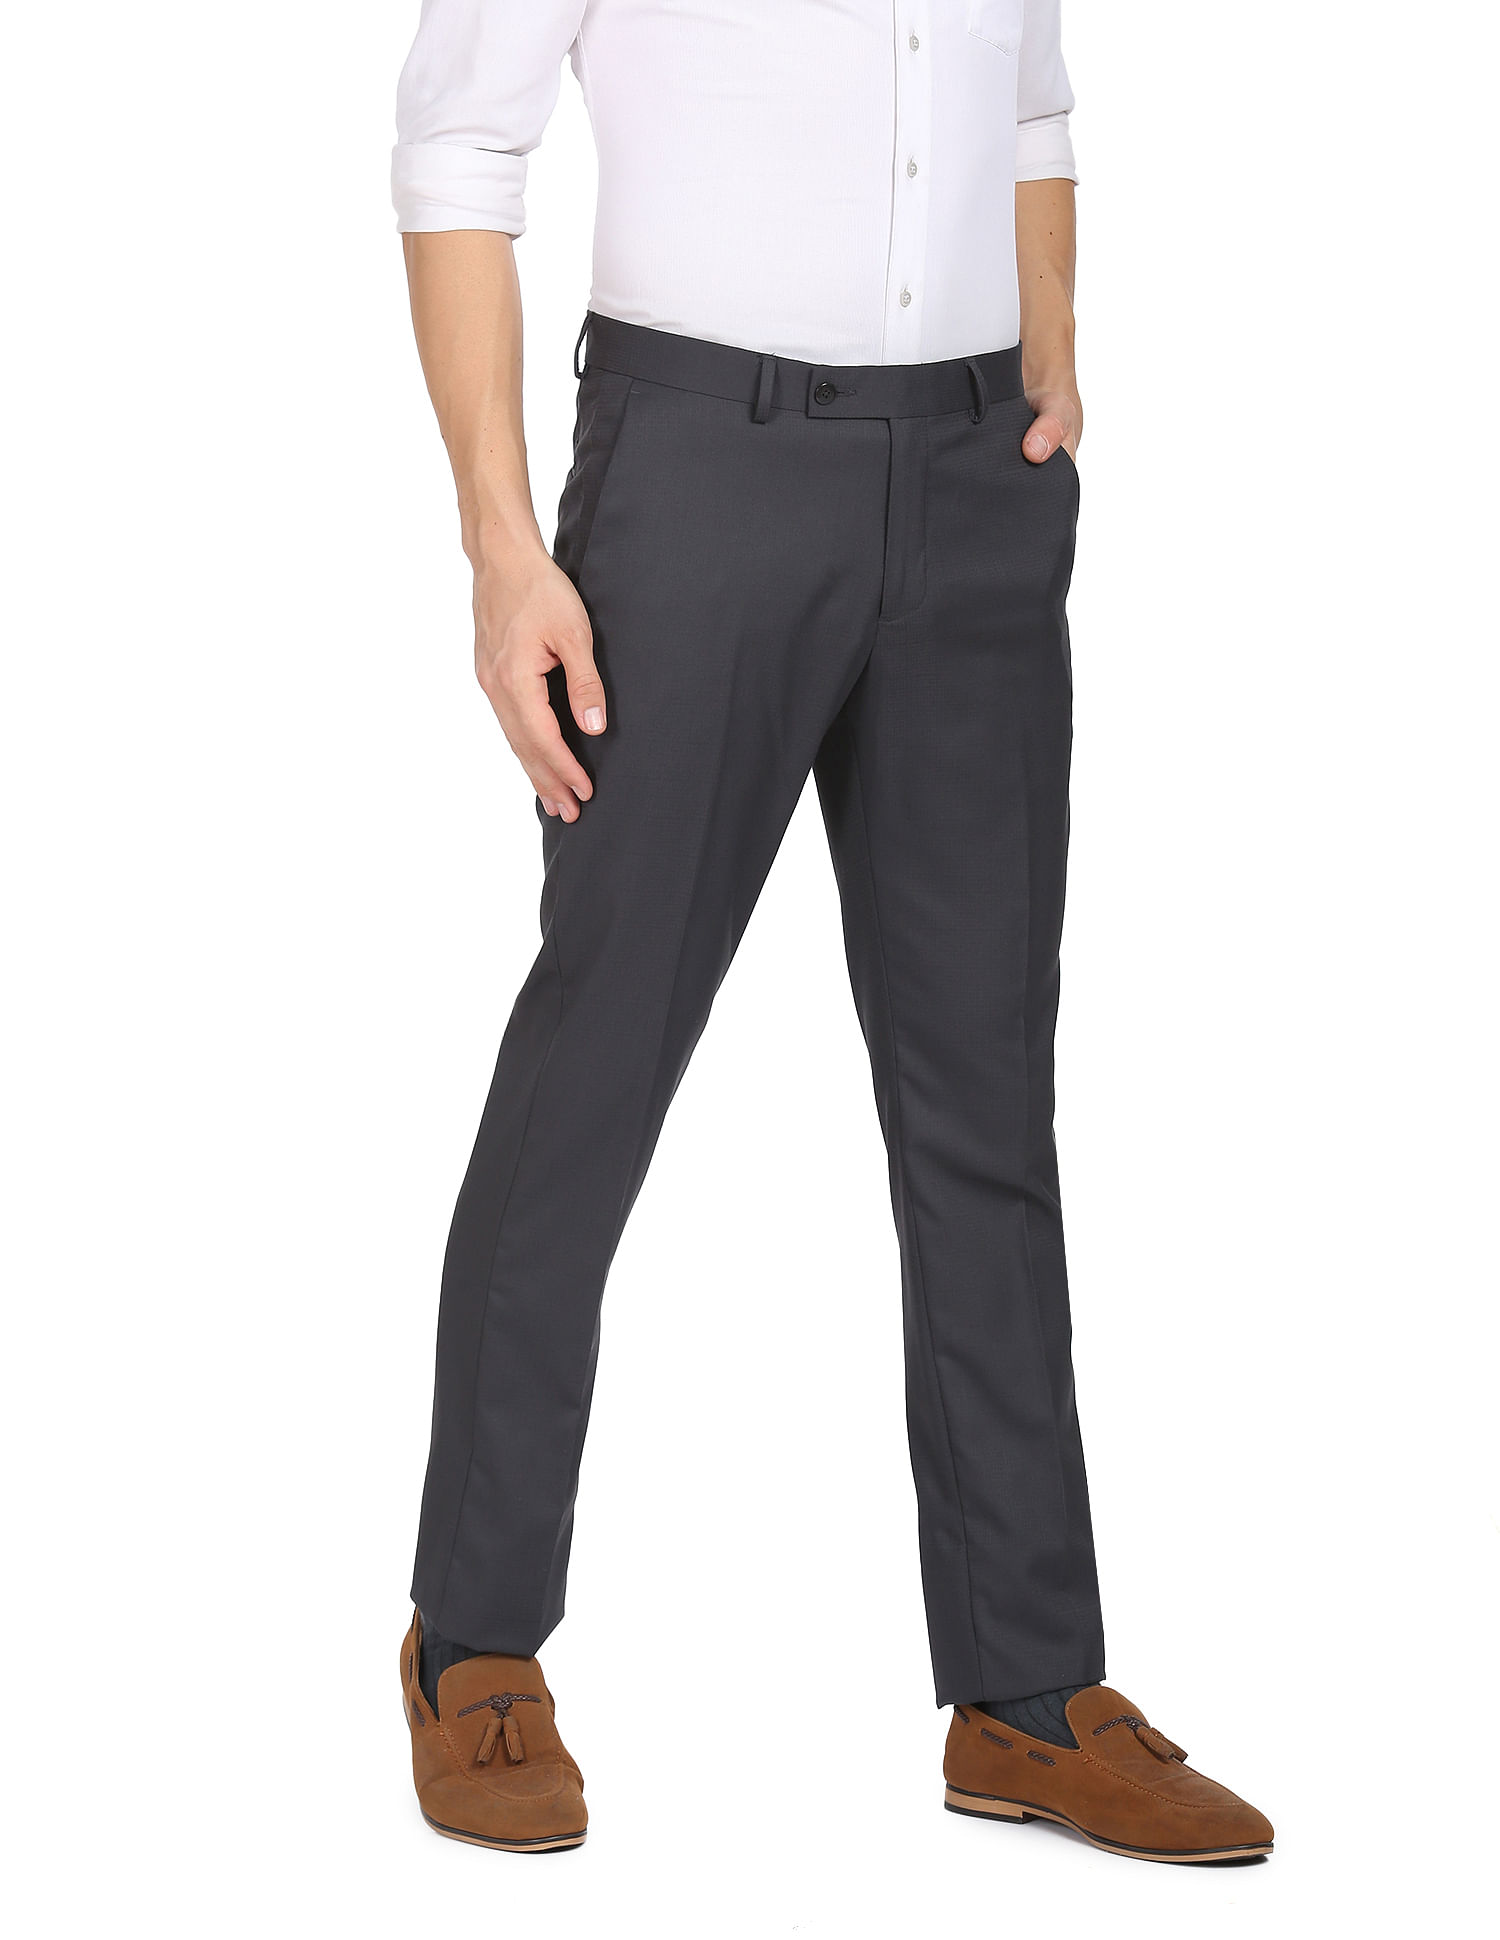 Formal 4 way Stretch Trousers in Black Slim Fit